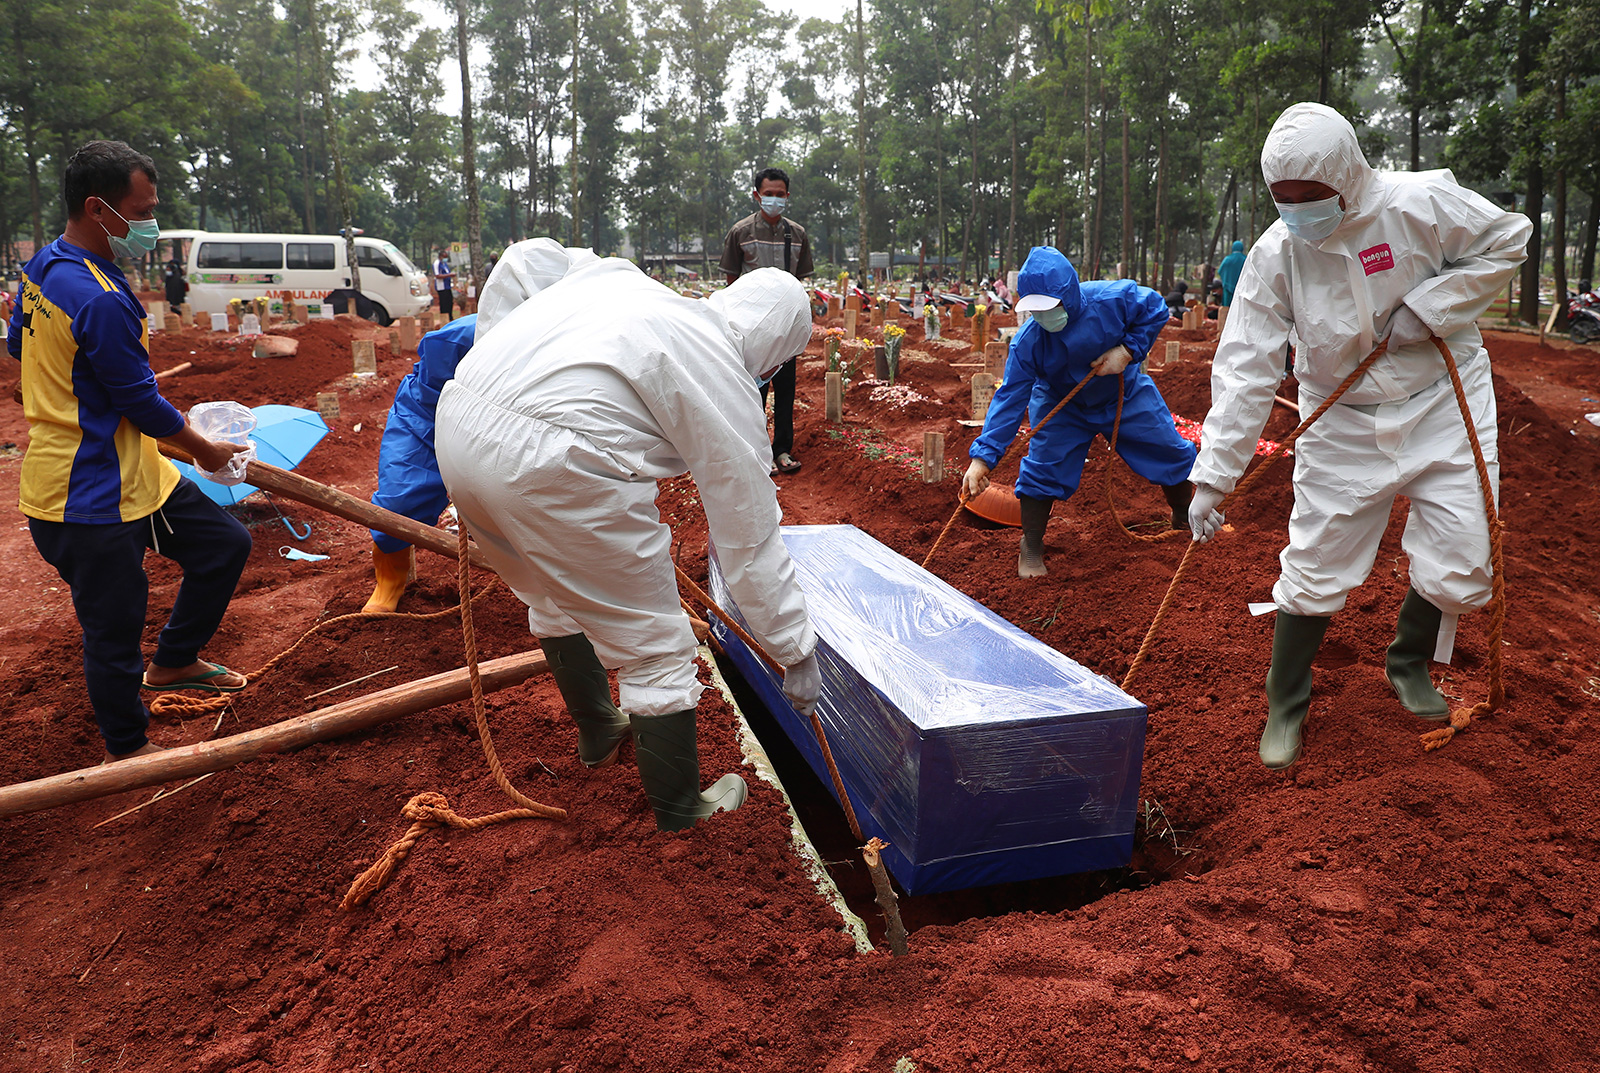 Workers in protective gear lower a coffin of a Covid-19 victim to a grave for burial at the Cipenjo Cemetery in Bogor, West Java, Indonesia, on Wednesday, July 14.